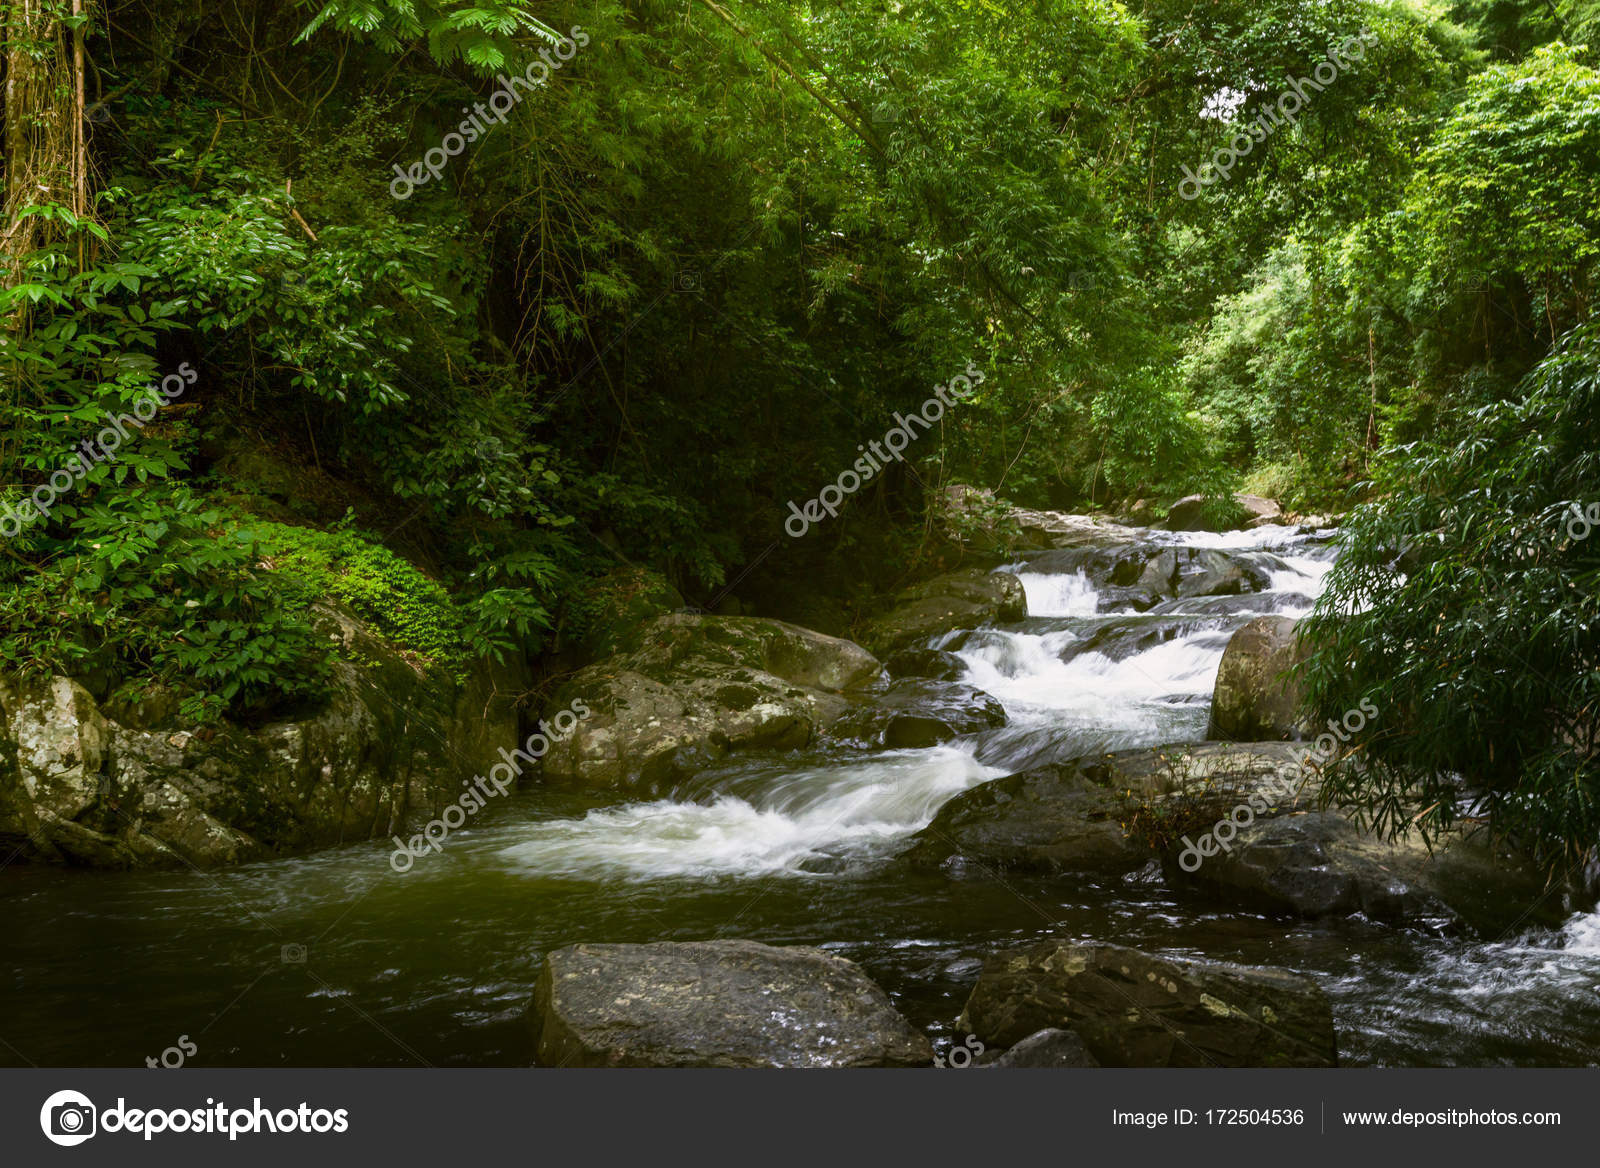 Beautiful Landscape Photography Of Waterfall In A Deep Forest Stock Photo Image By C King1robert Gmail Com